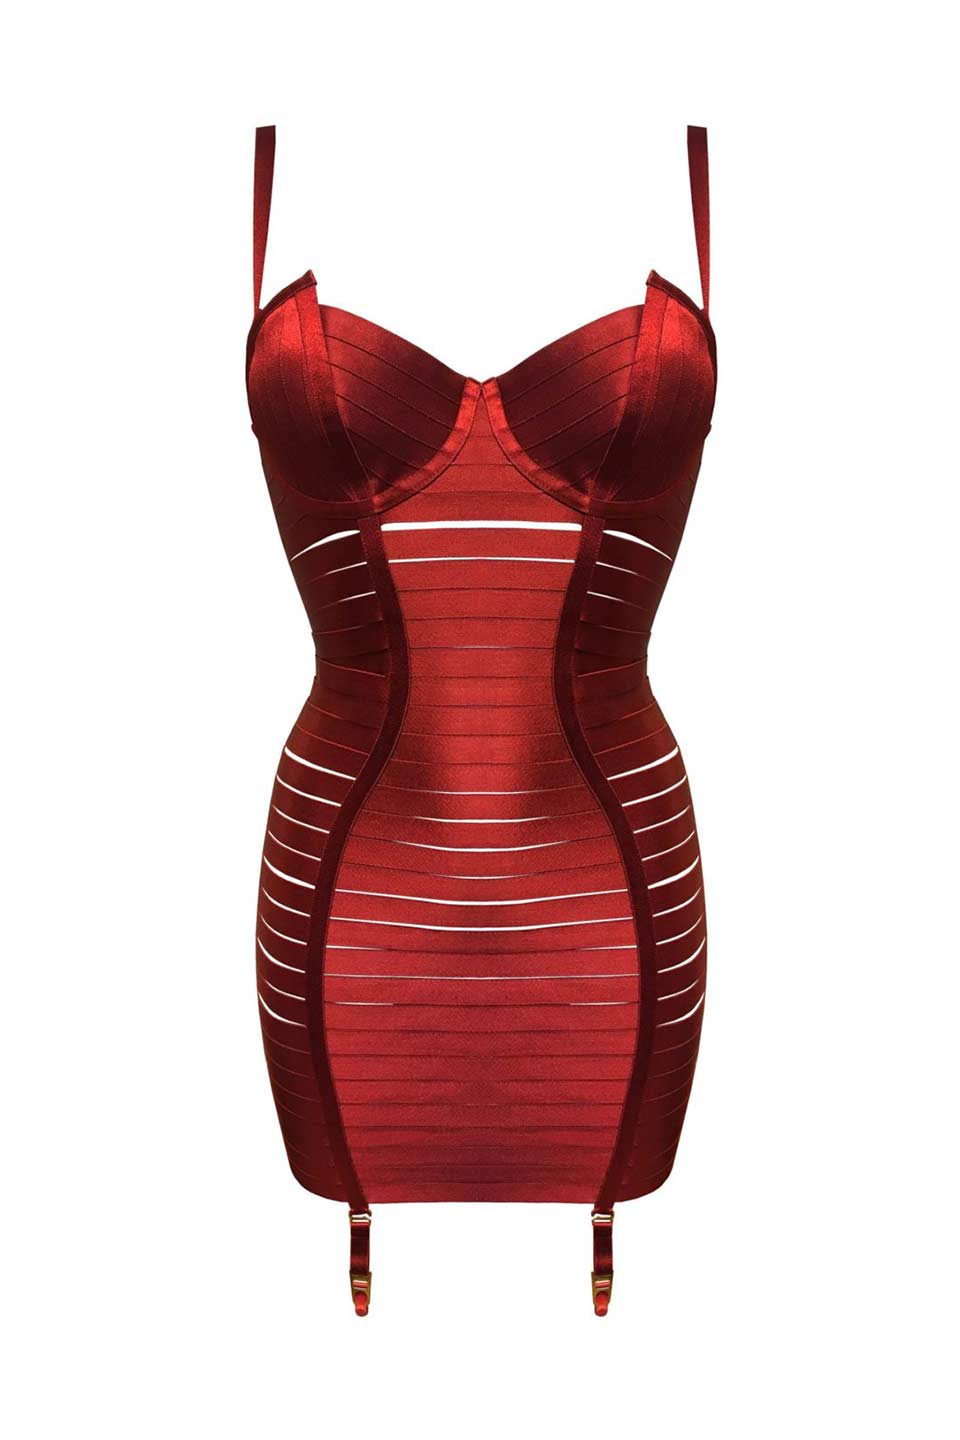 Thumbnail for Product gallery 1, Luxury fashion designer mini dress lingerie red